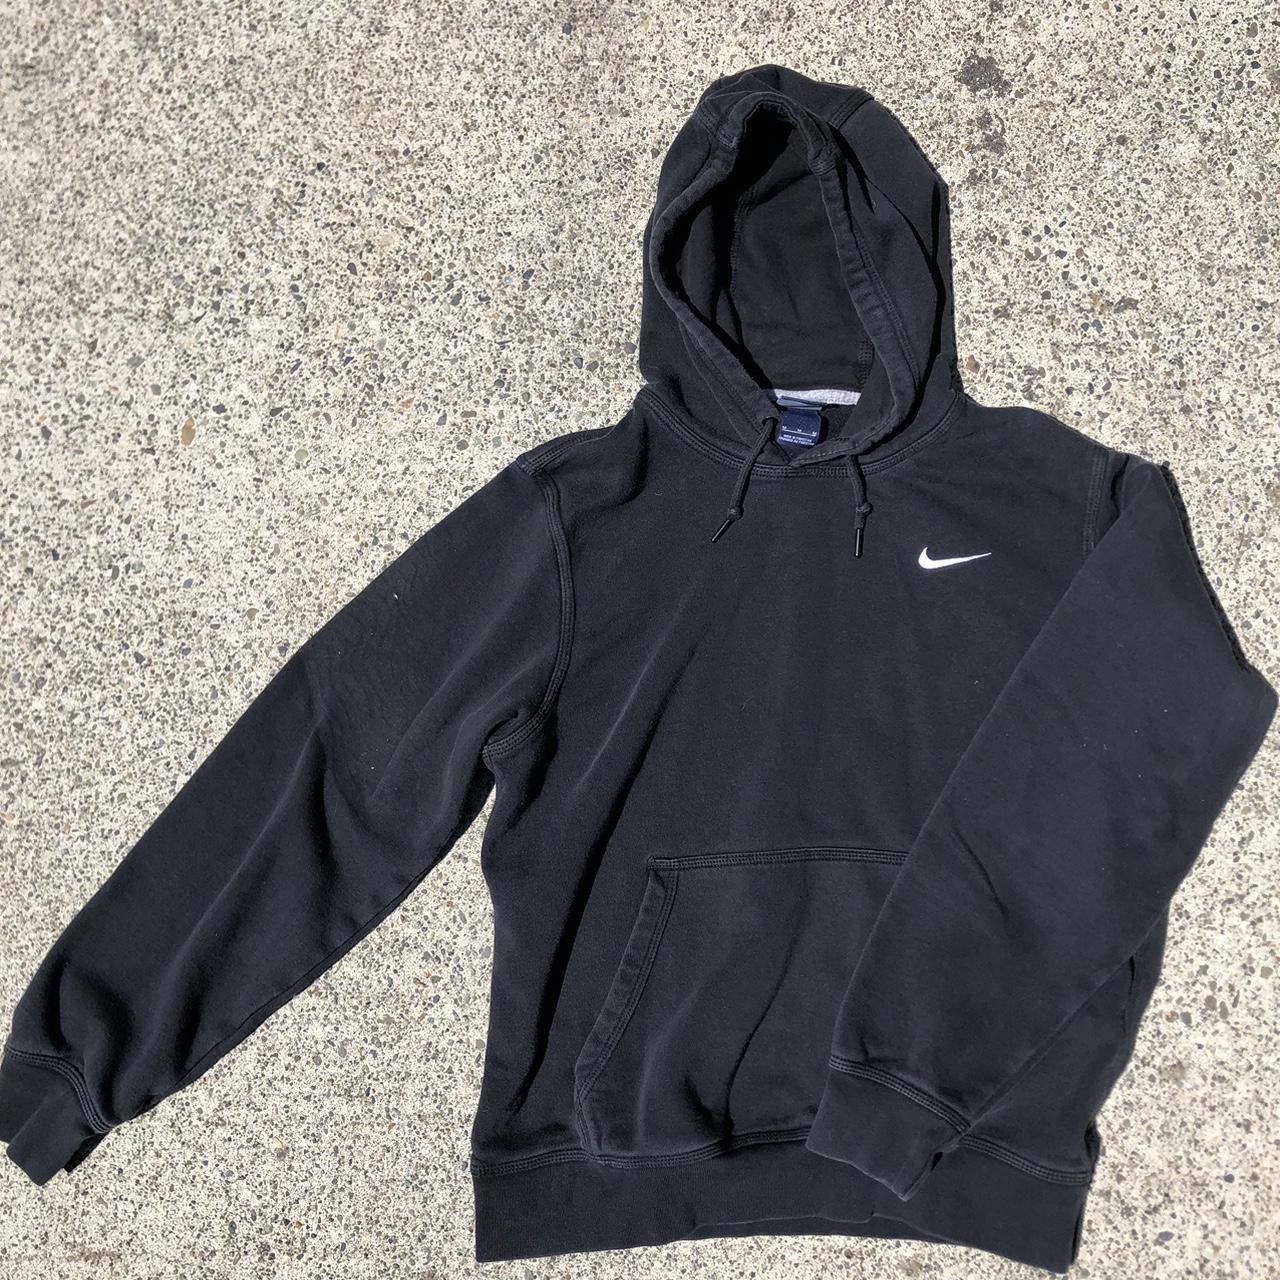 Plain Nike hoodie early 2000s Size M This is a... - Depop